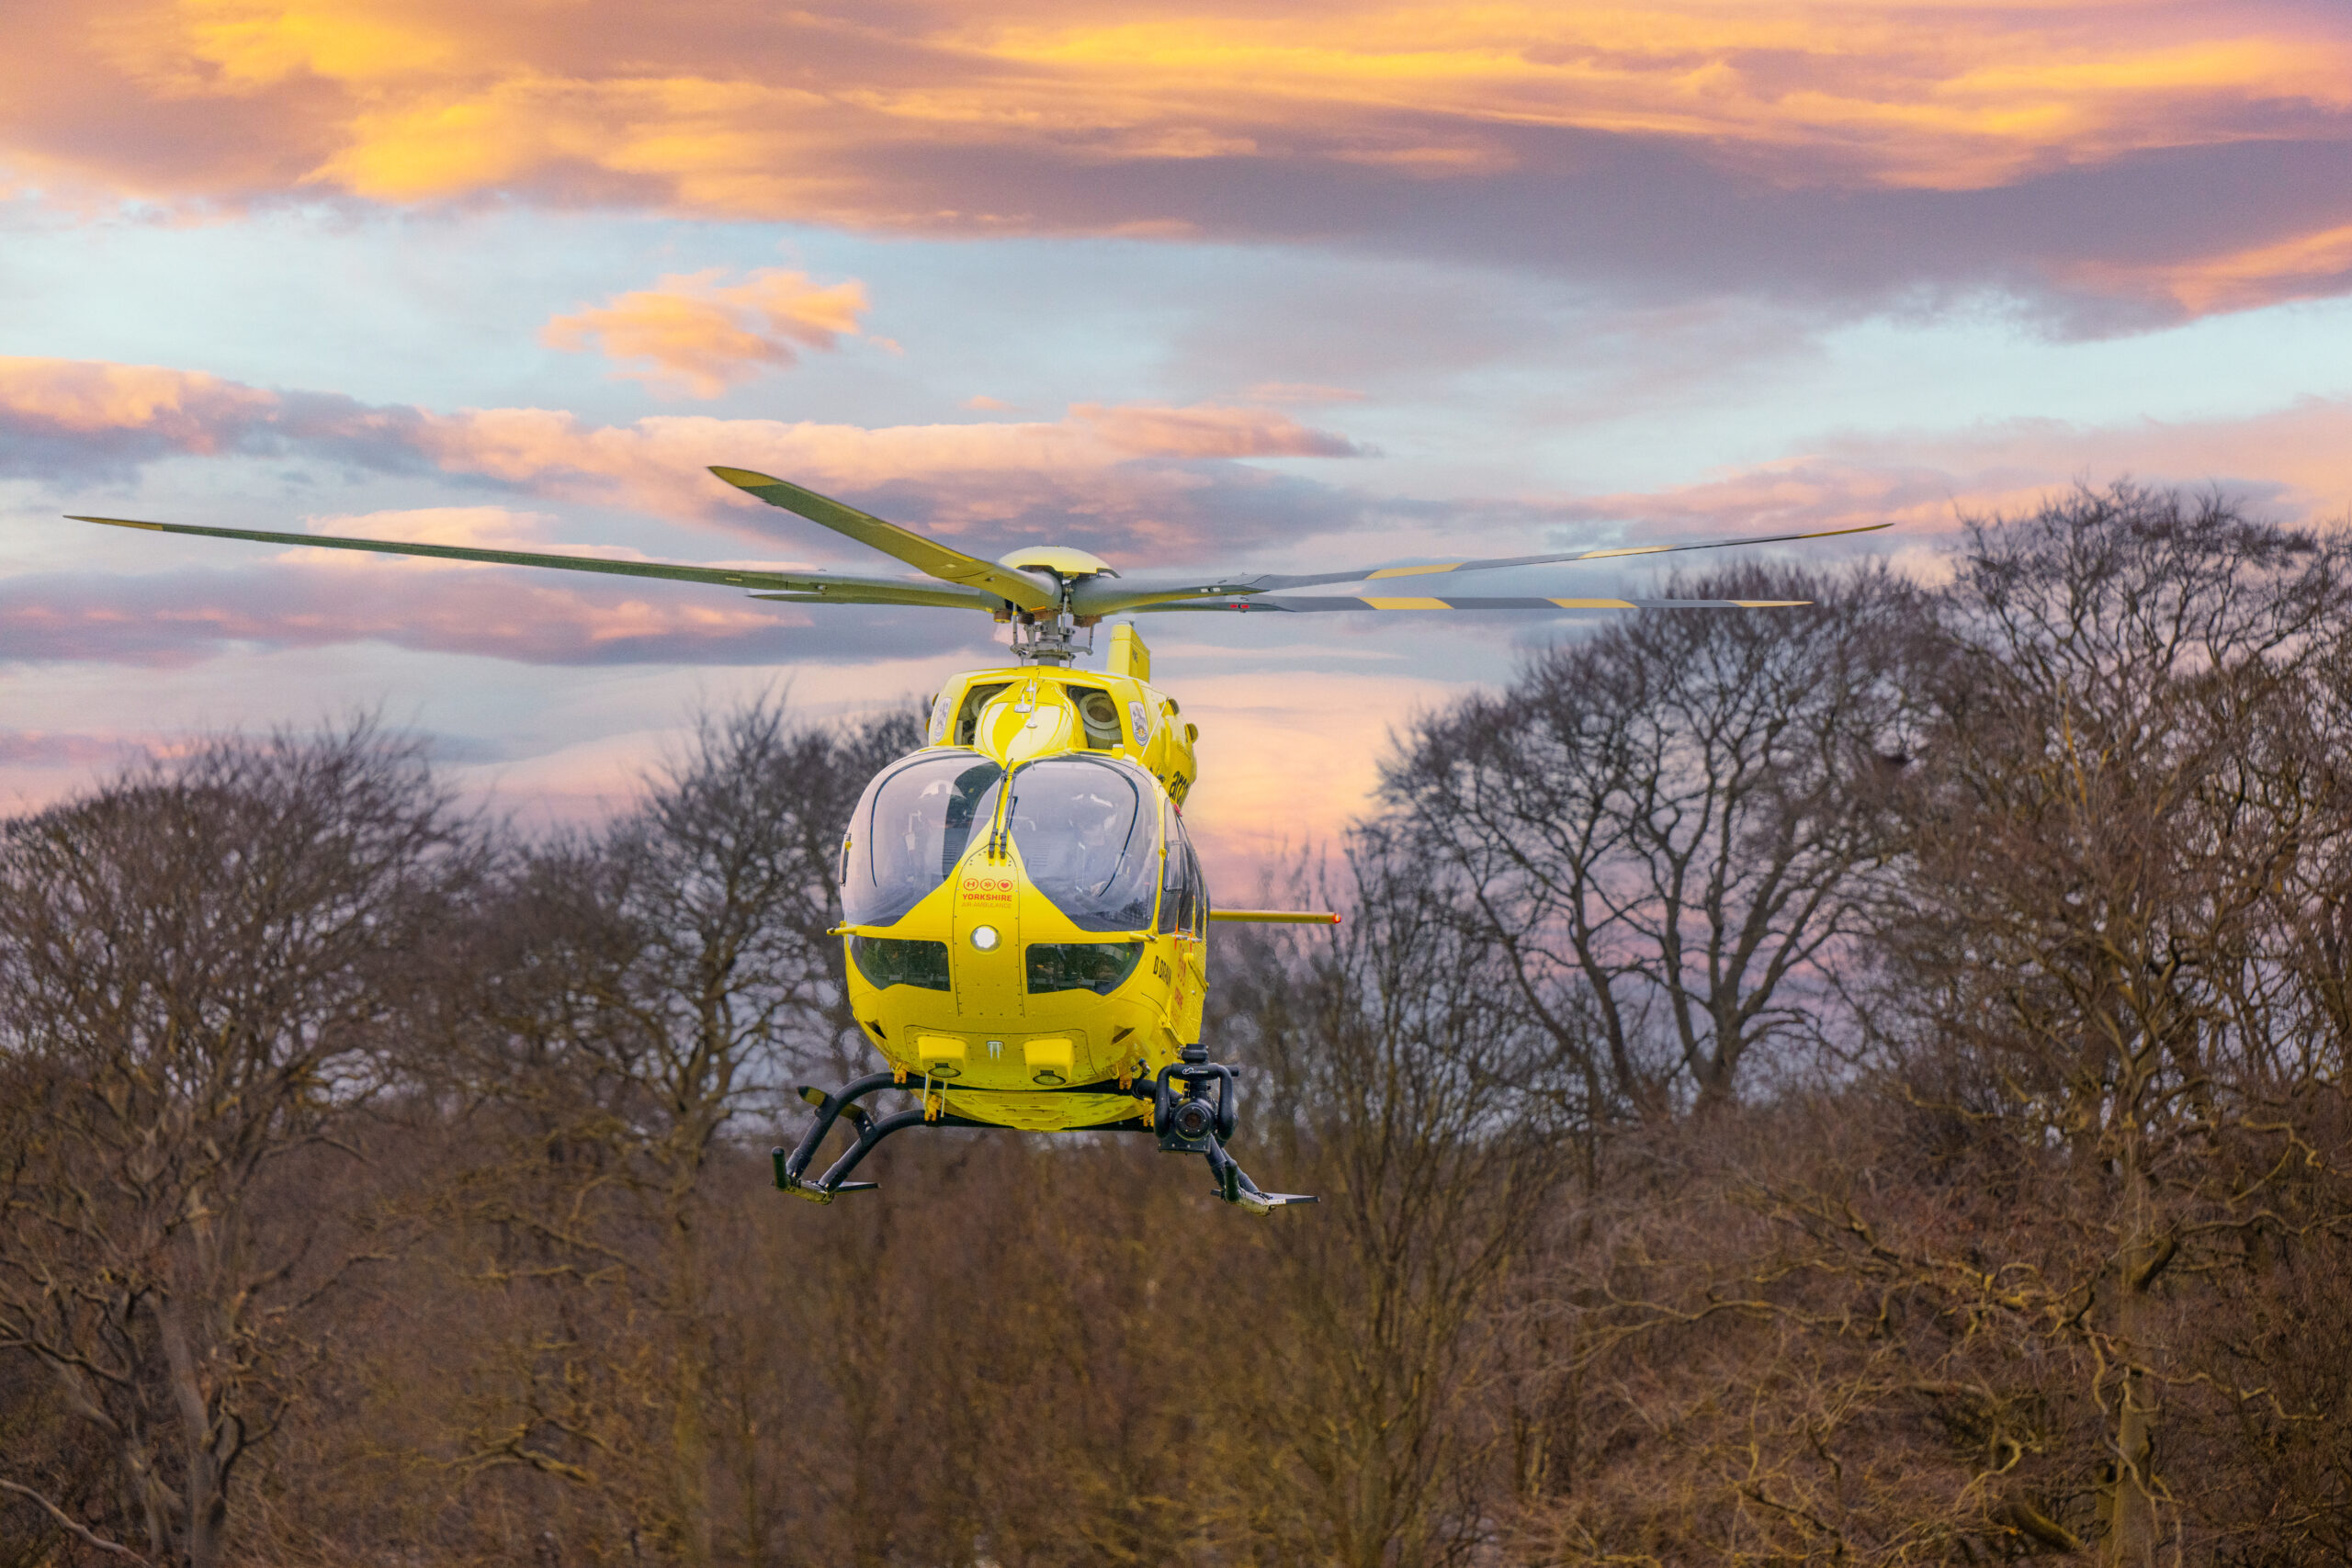 A front on image of a yellow helicopter flying, with trees in the background.